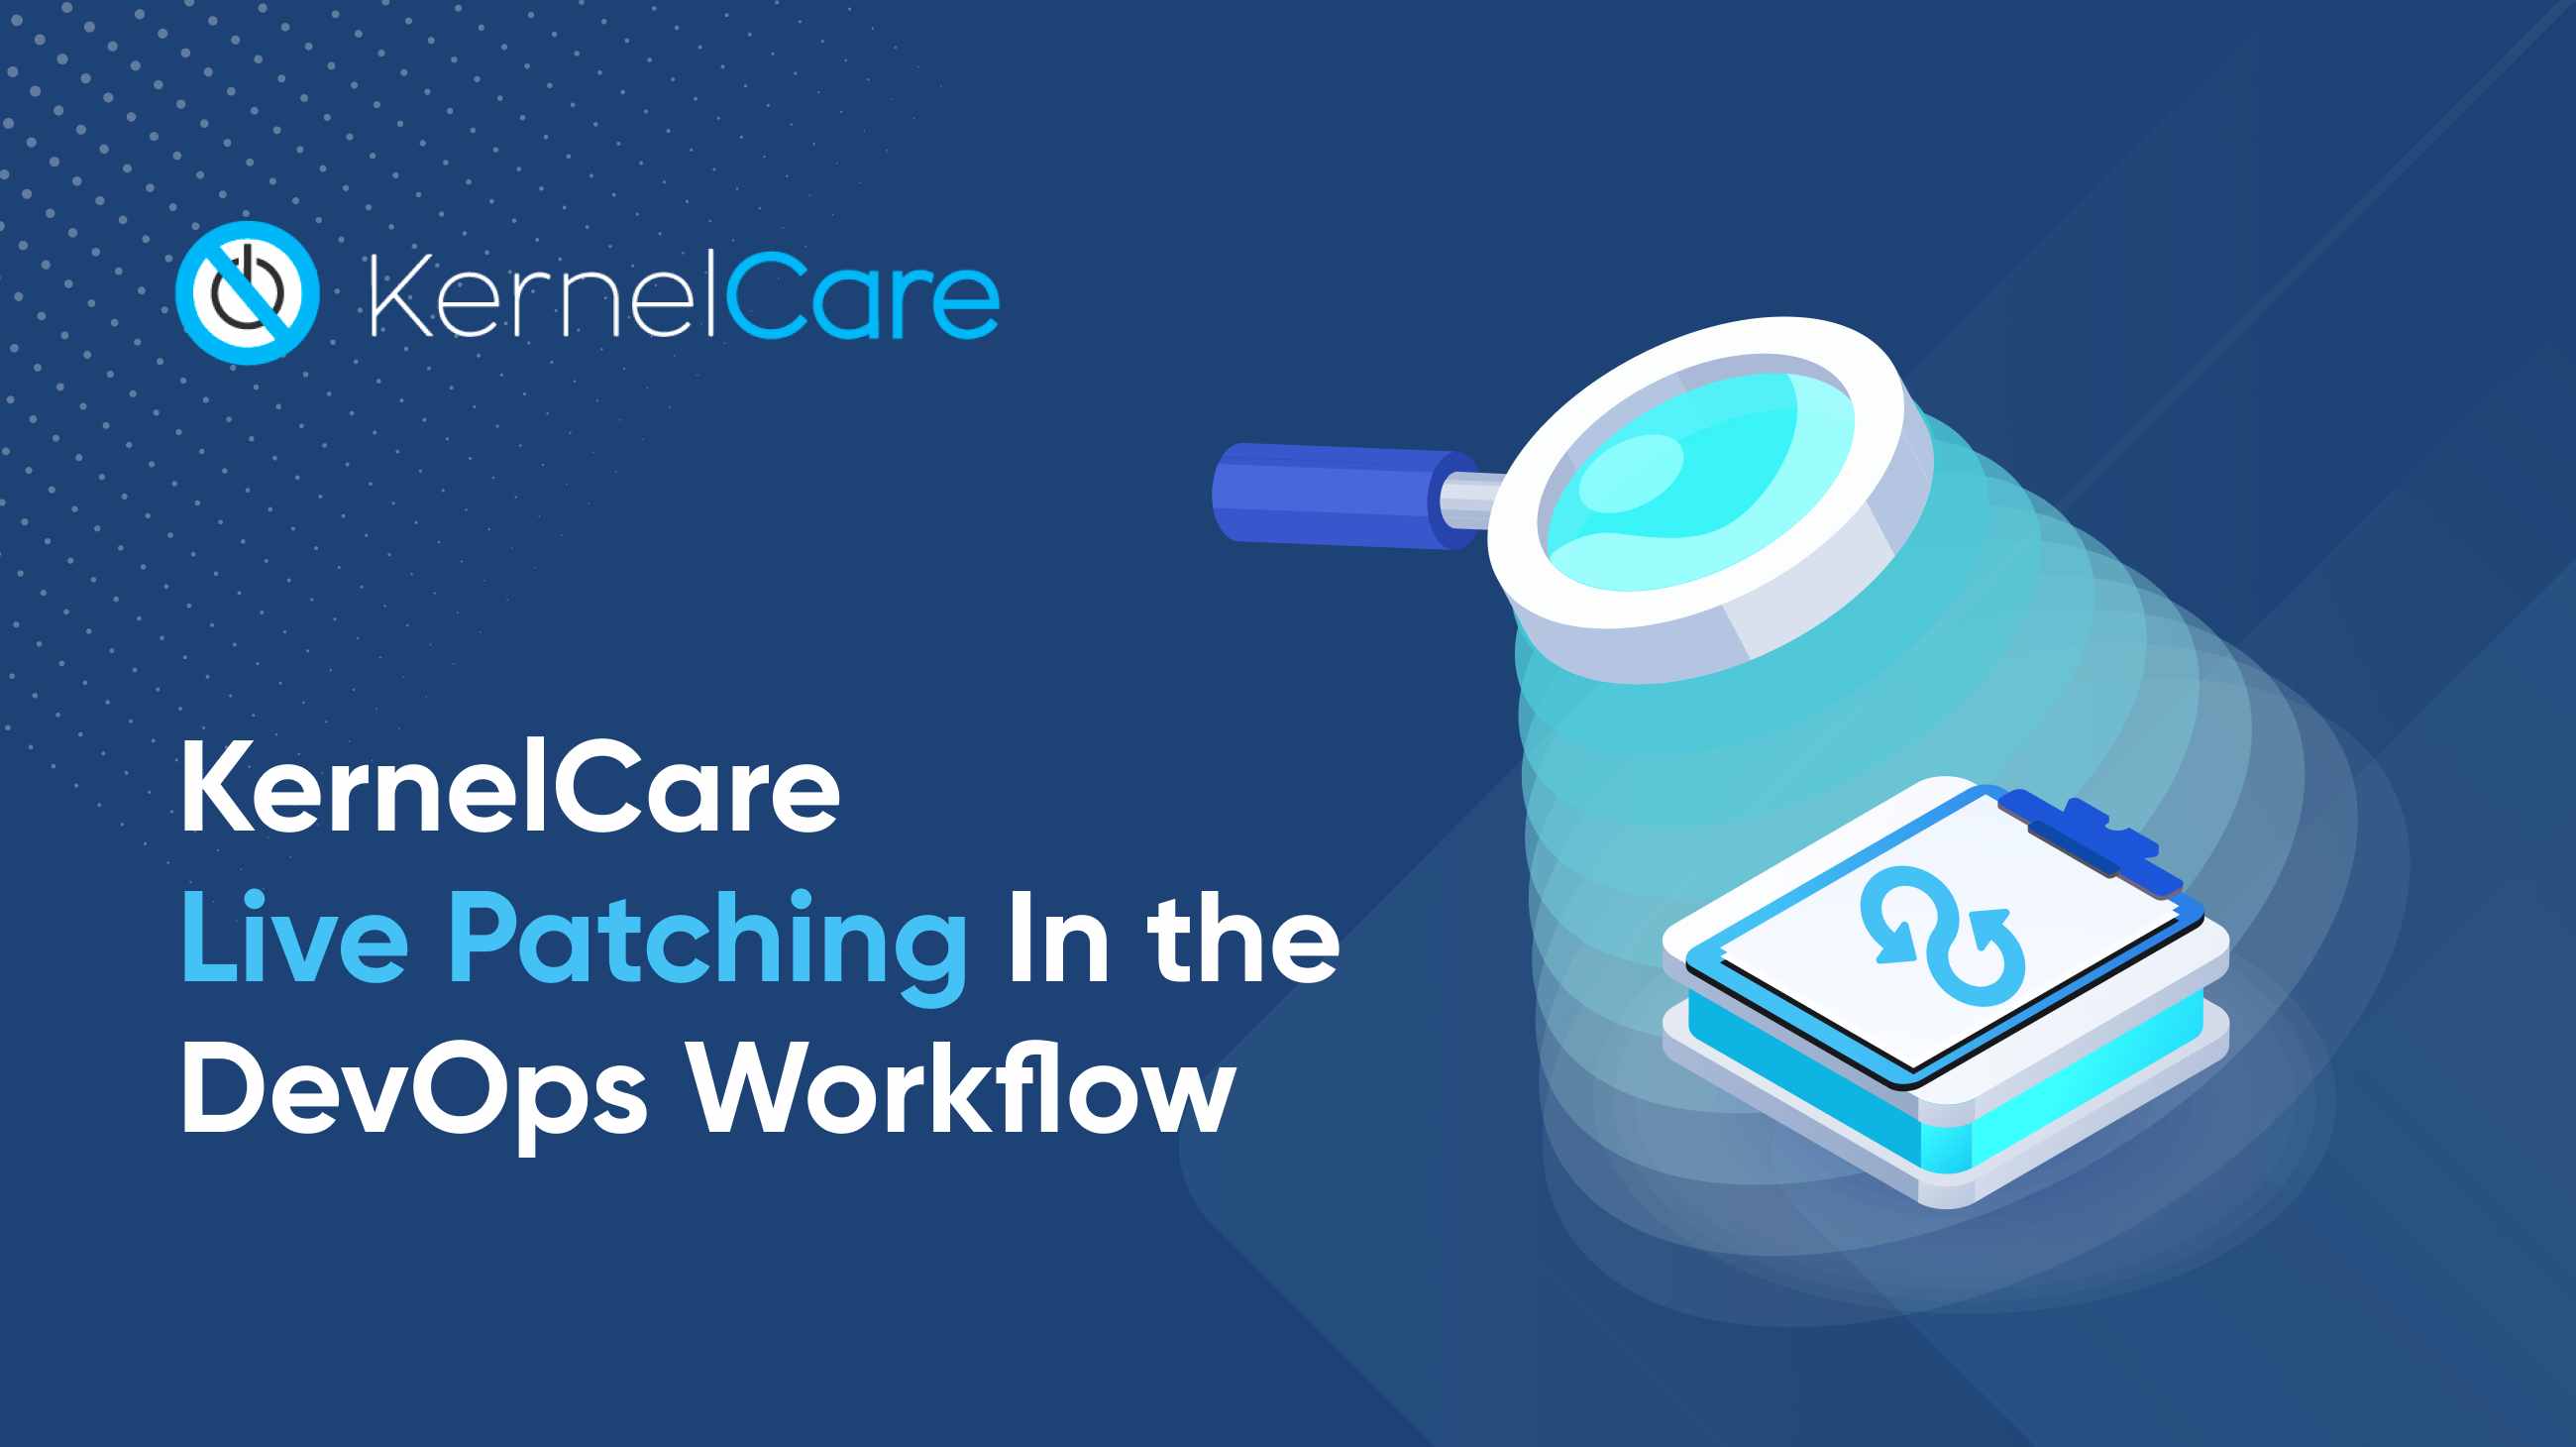 KernelCare Live Patching In the DevOps Workflow